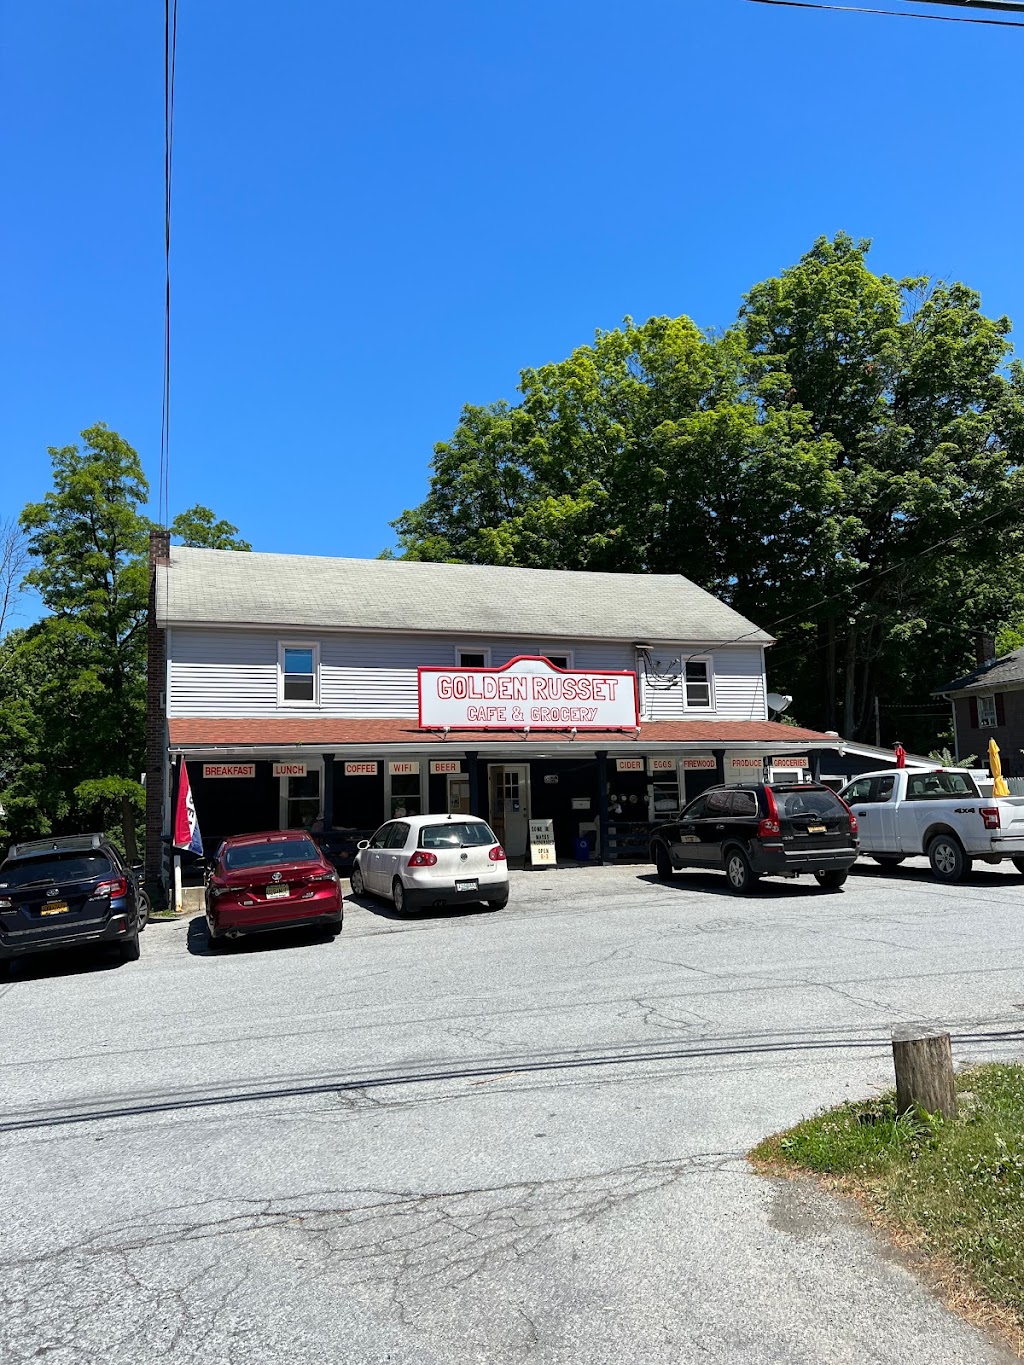 Golden Russet Cafe & Grocery | 835 Fiddlers Bridge Rd, Rhinebeck, NY 12572 | Phone: (845) 266-0888